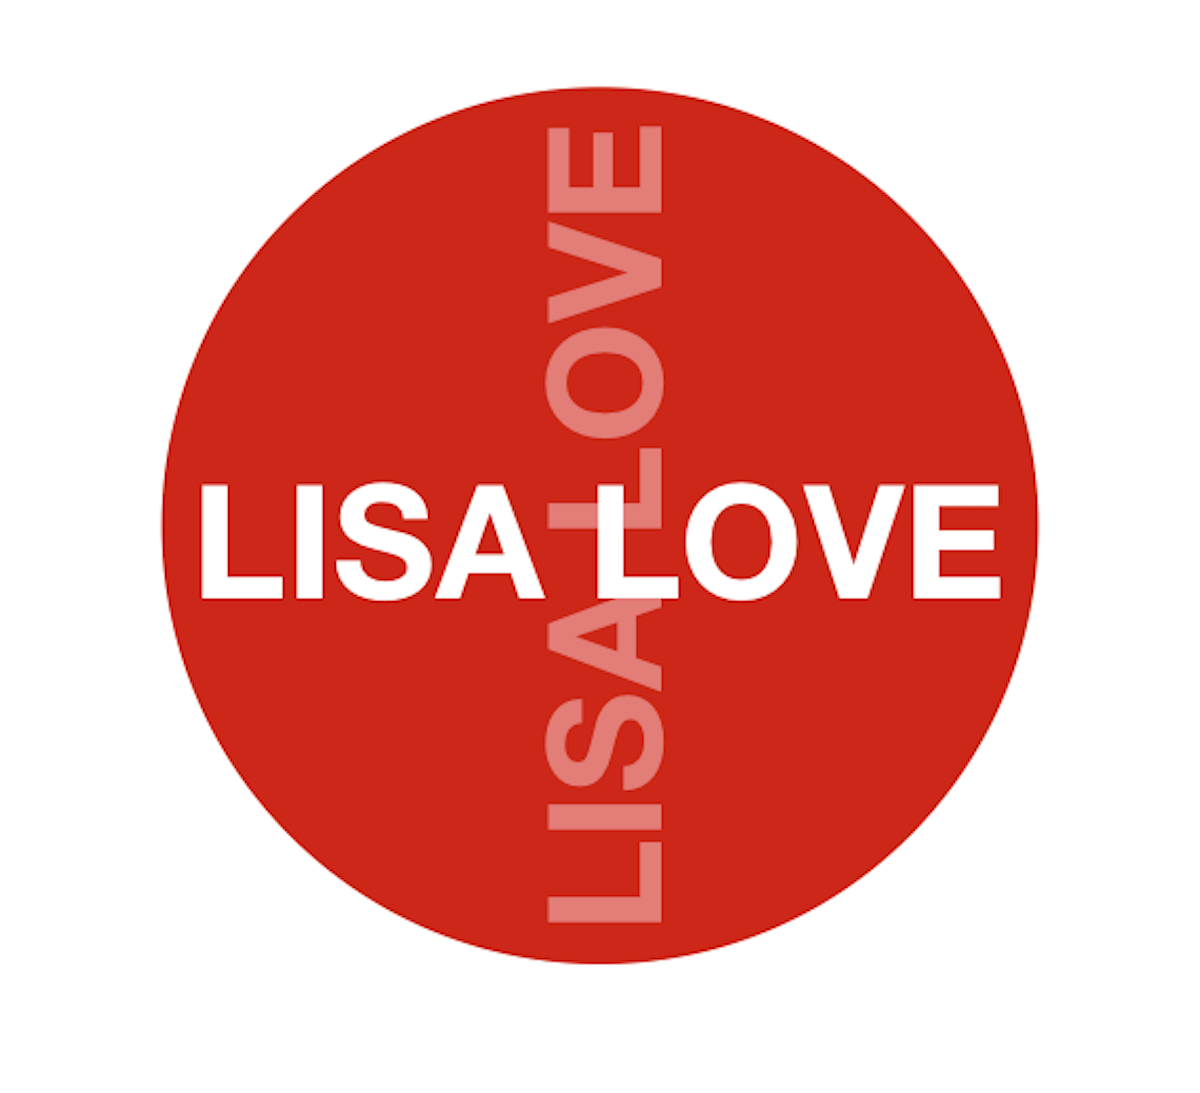 The lisa love experience